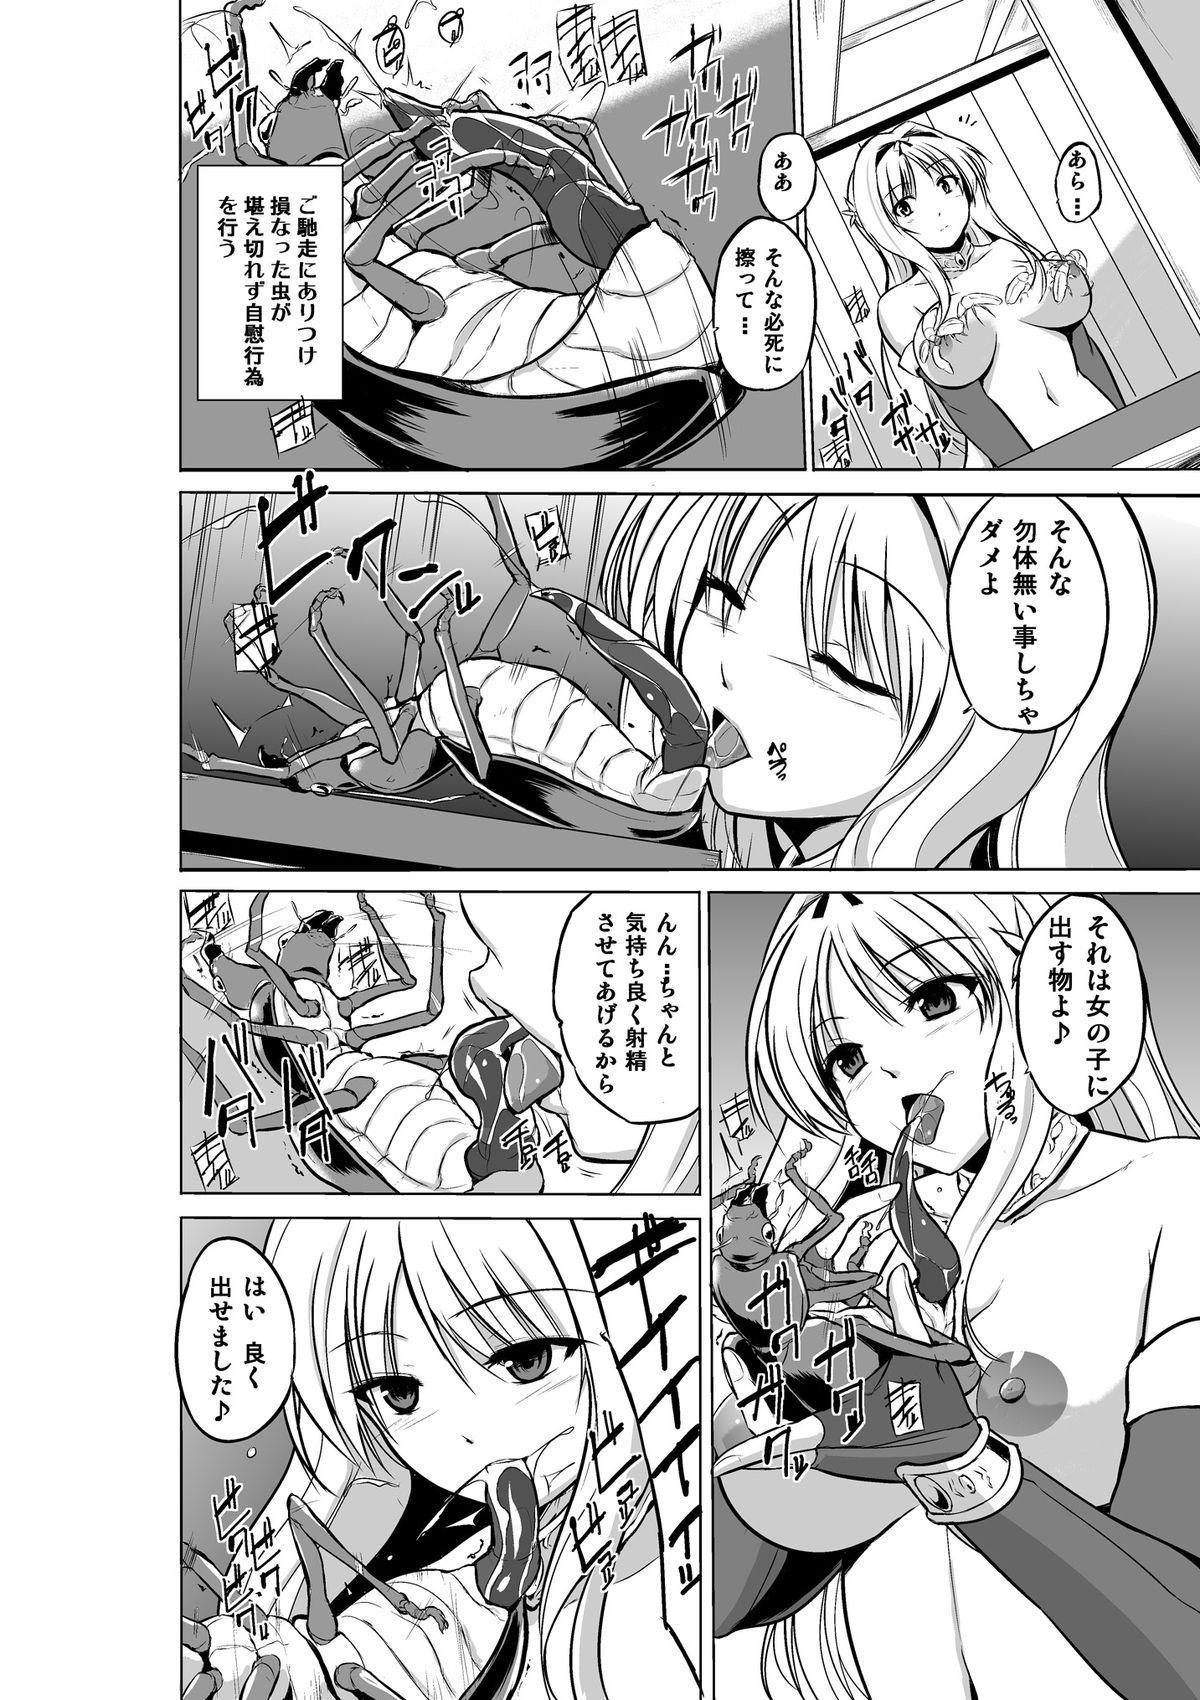 Soapy Dungeon Travelers - Futari no Himegoto - Toheart2 Stepsiblings - Page 8